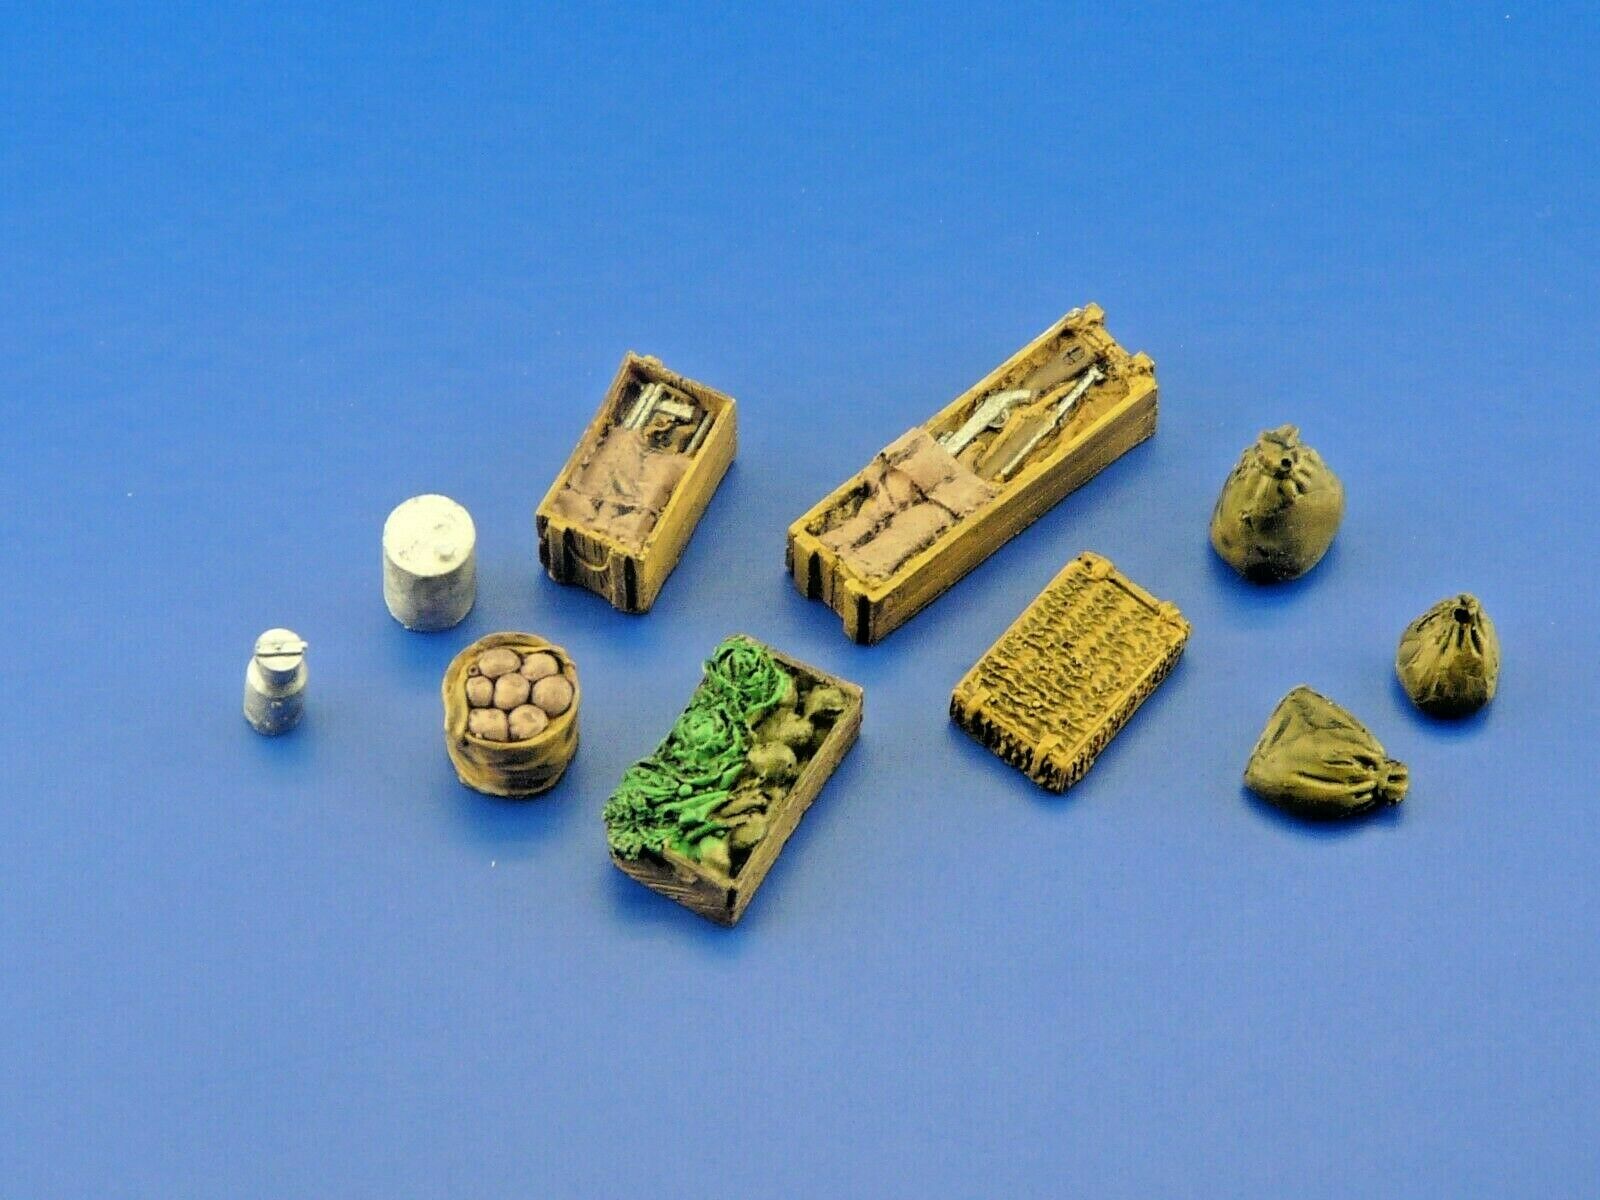 1/35 Food Supply Items Military Scale Resin Modelling Stowage Kit Detail Accessories - redoguk